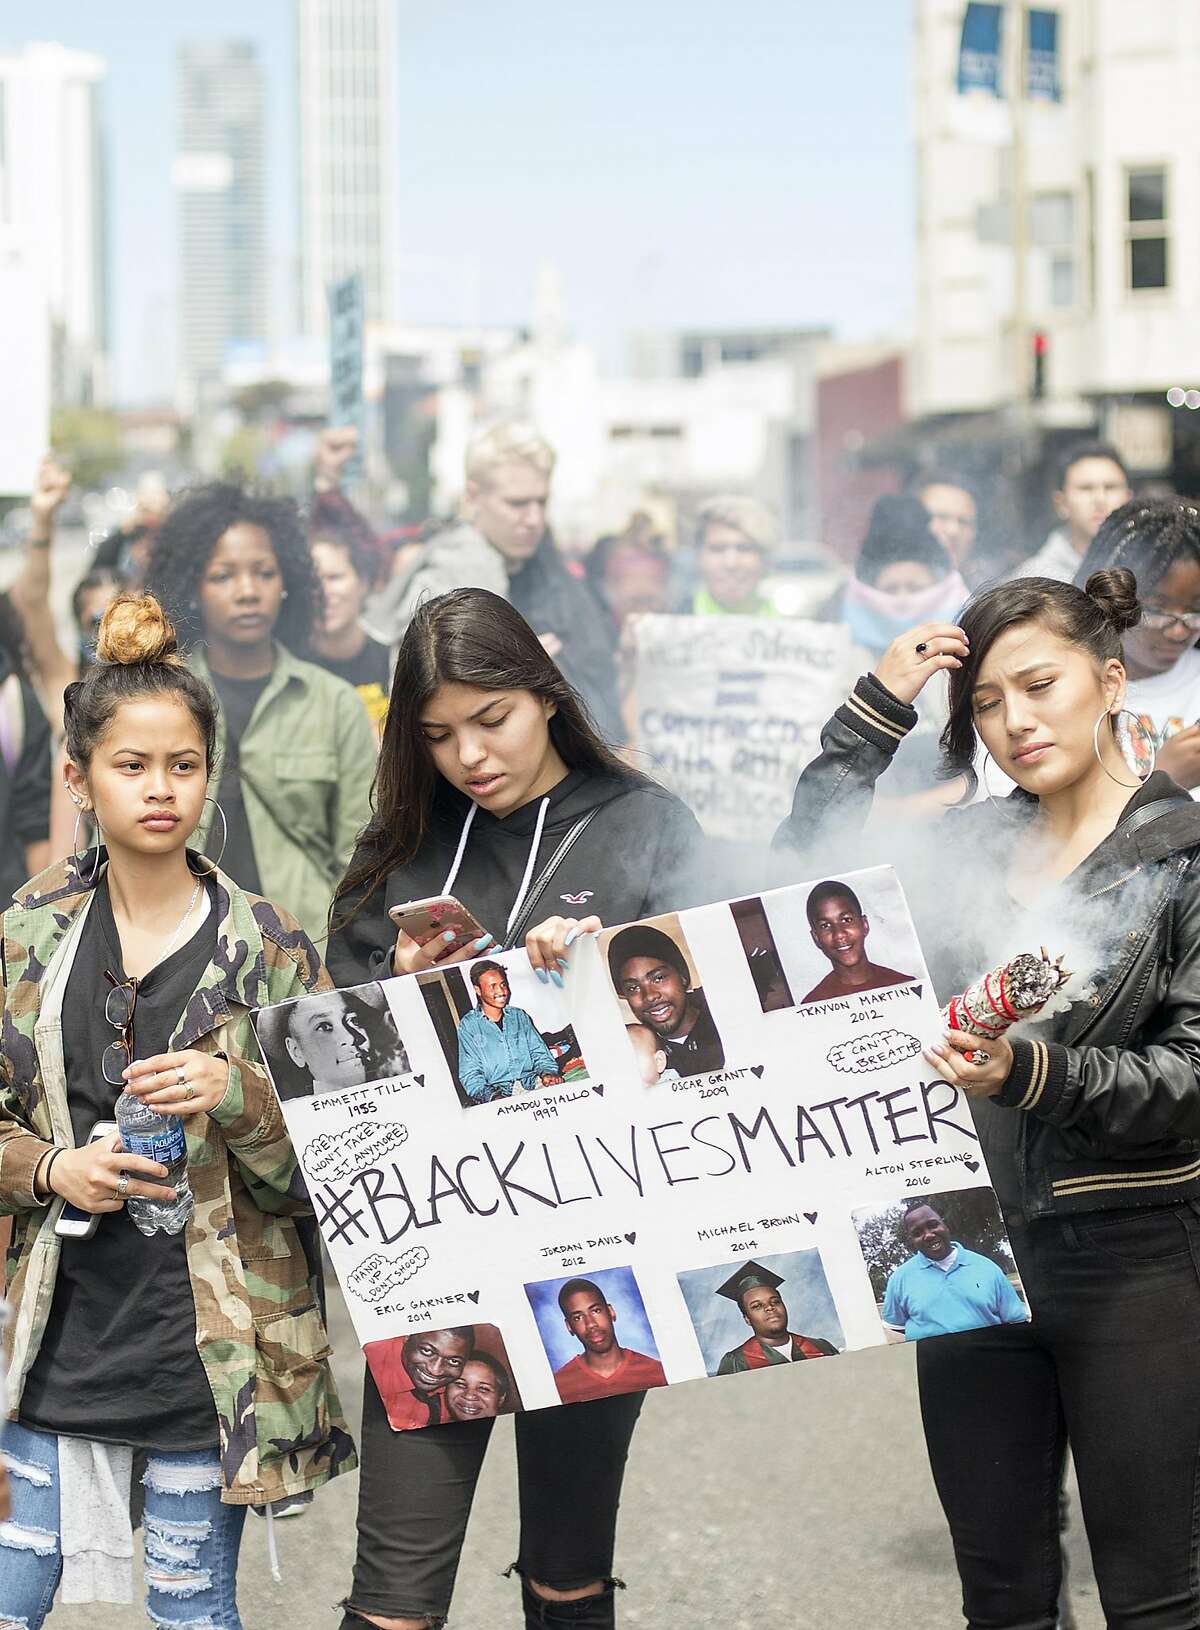 Protesters surround the intersection of 5th and Bryant in San Francisco on July 09, 2016. A crowd of about 300 people marched through the streets taking over various intersections throughout San Francisco shouting slogans like "black lives matter" among others.